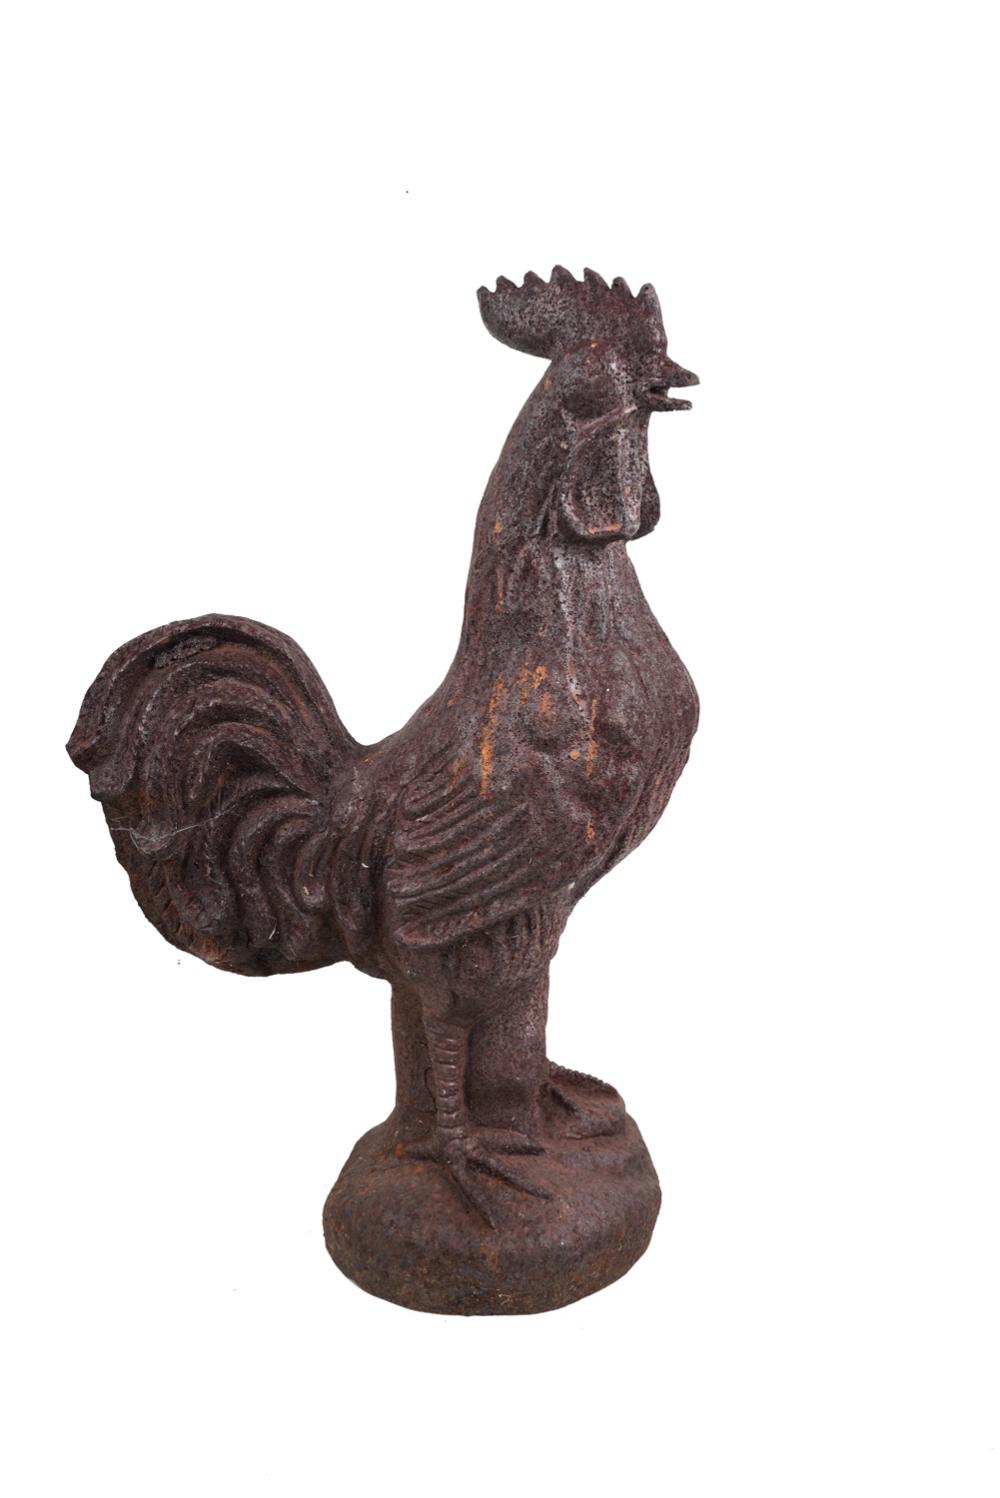 CAST IRON ROOSTER23 inches high Condition: